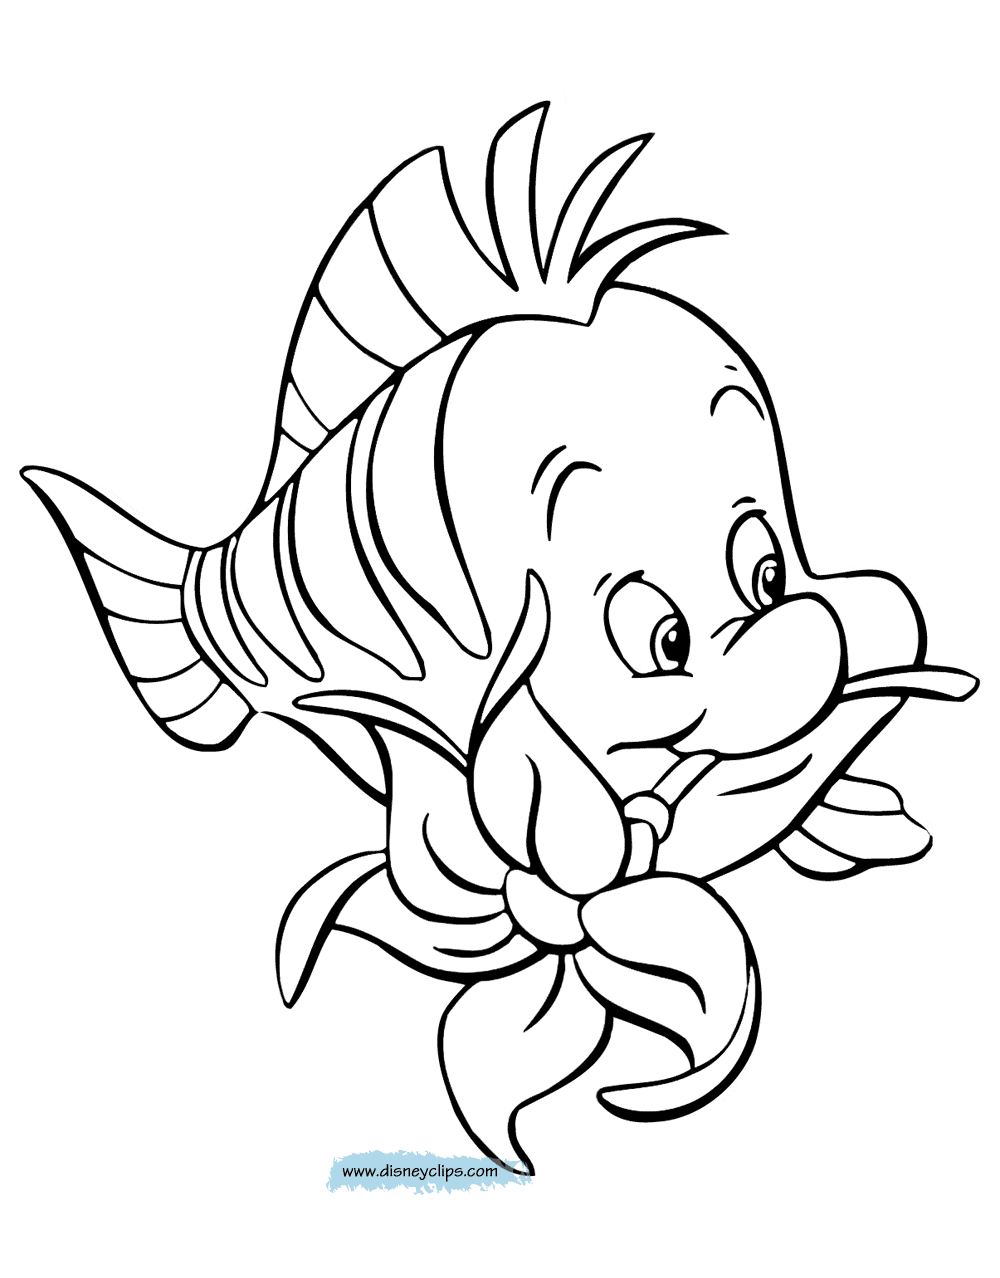 Download The Little Mermaid Coloring Pages (2) | Disneyclips.com